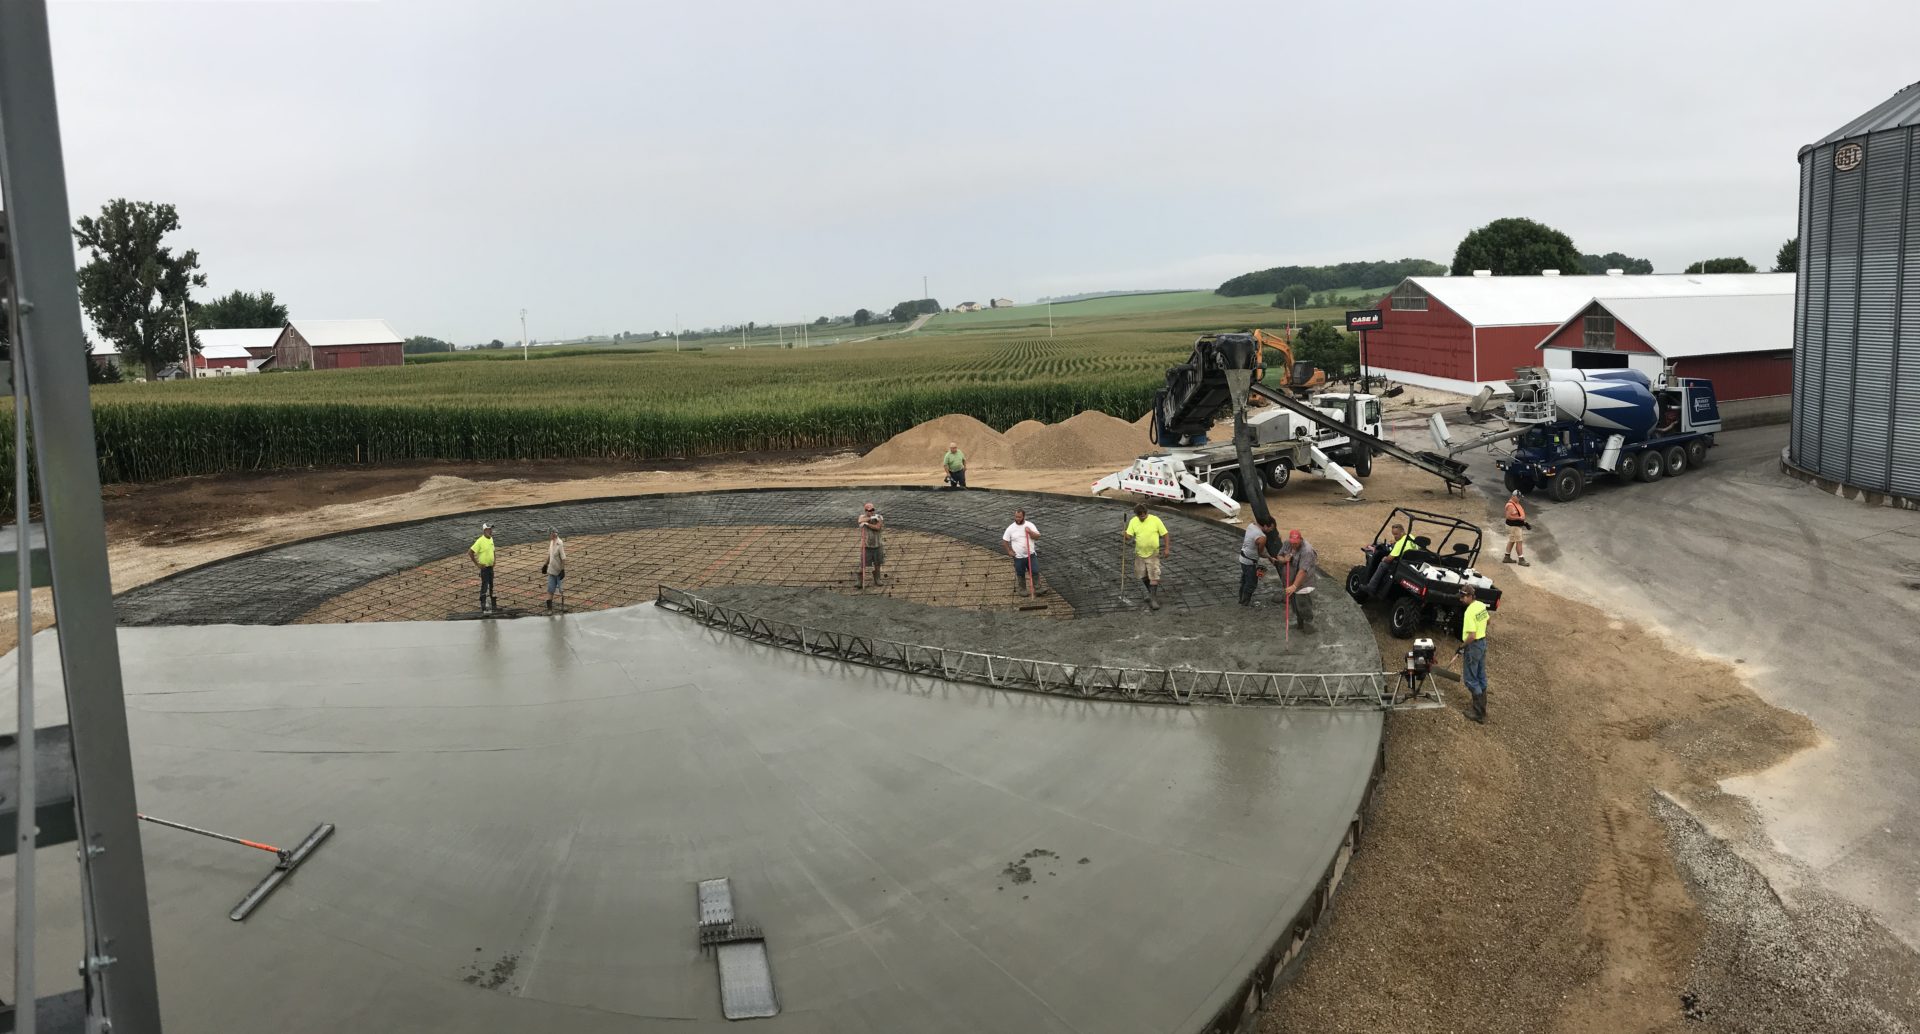 Workers creating a custom concrete design